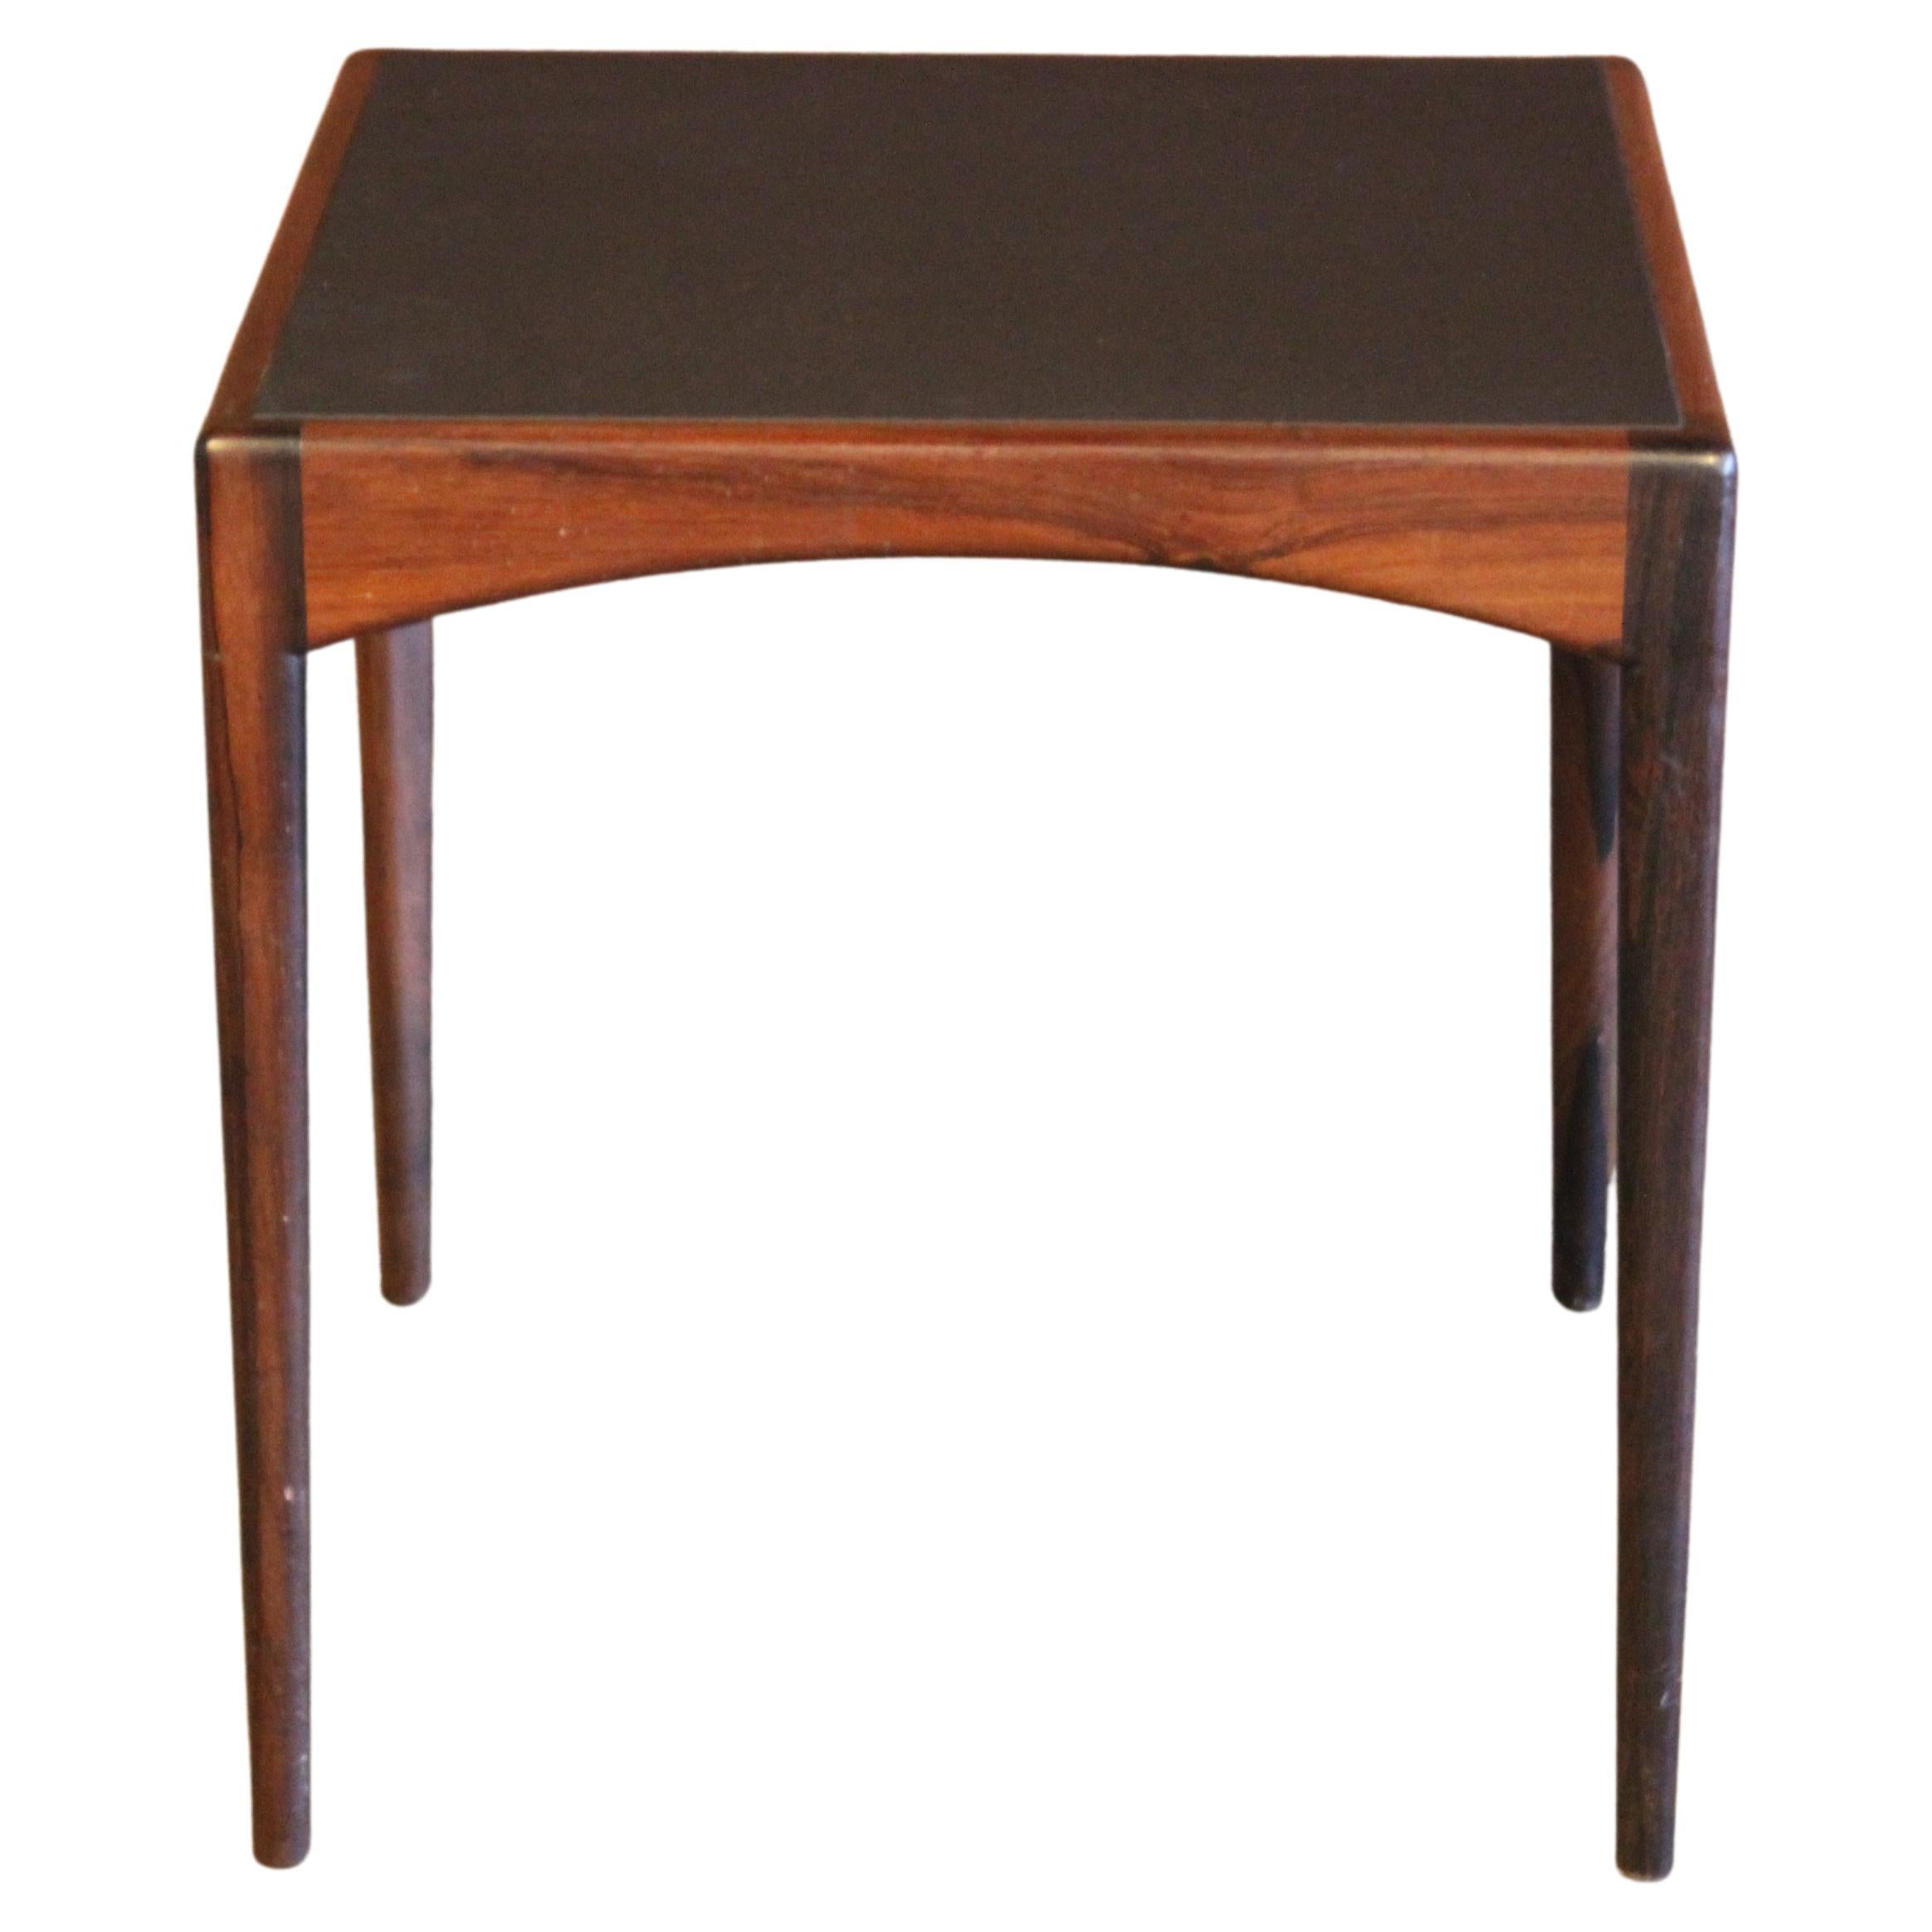 Rosewood Table with Leather Top, Denmark, 1950s